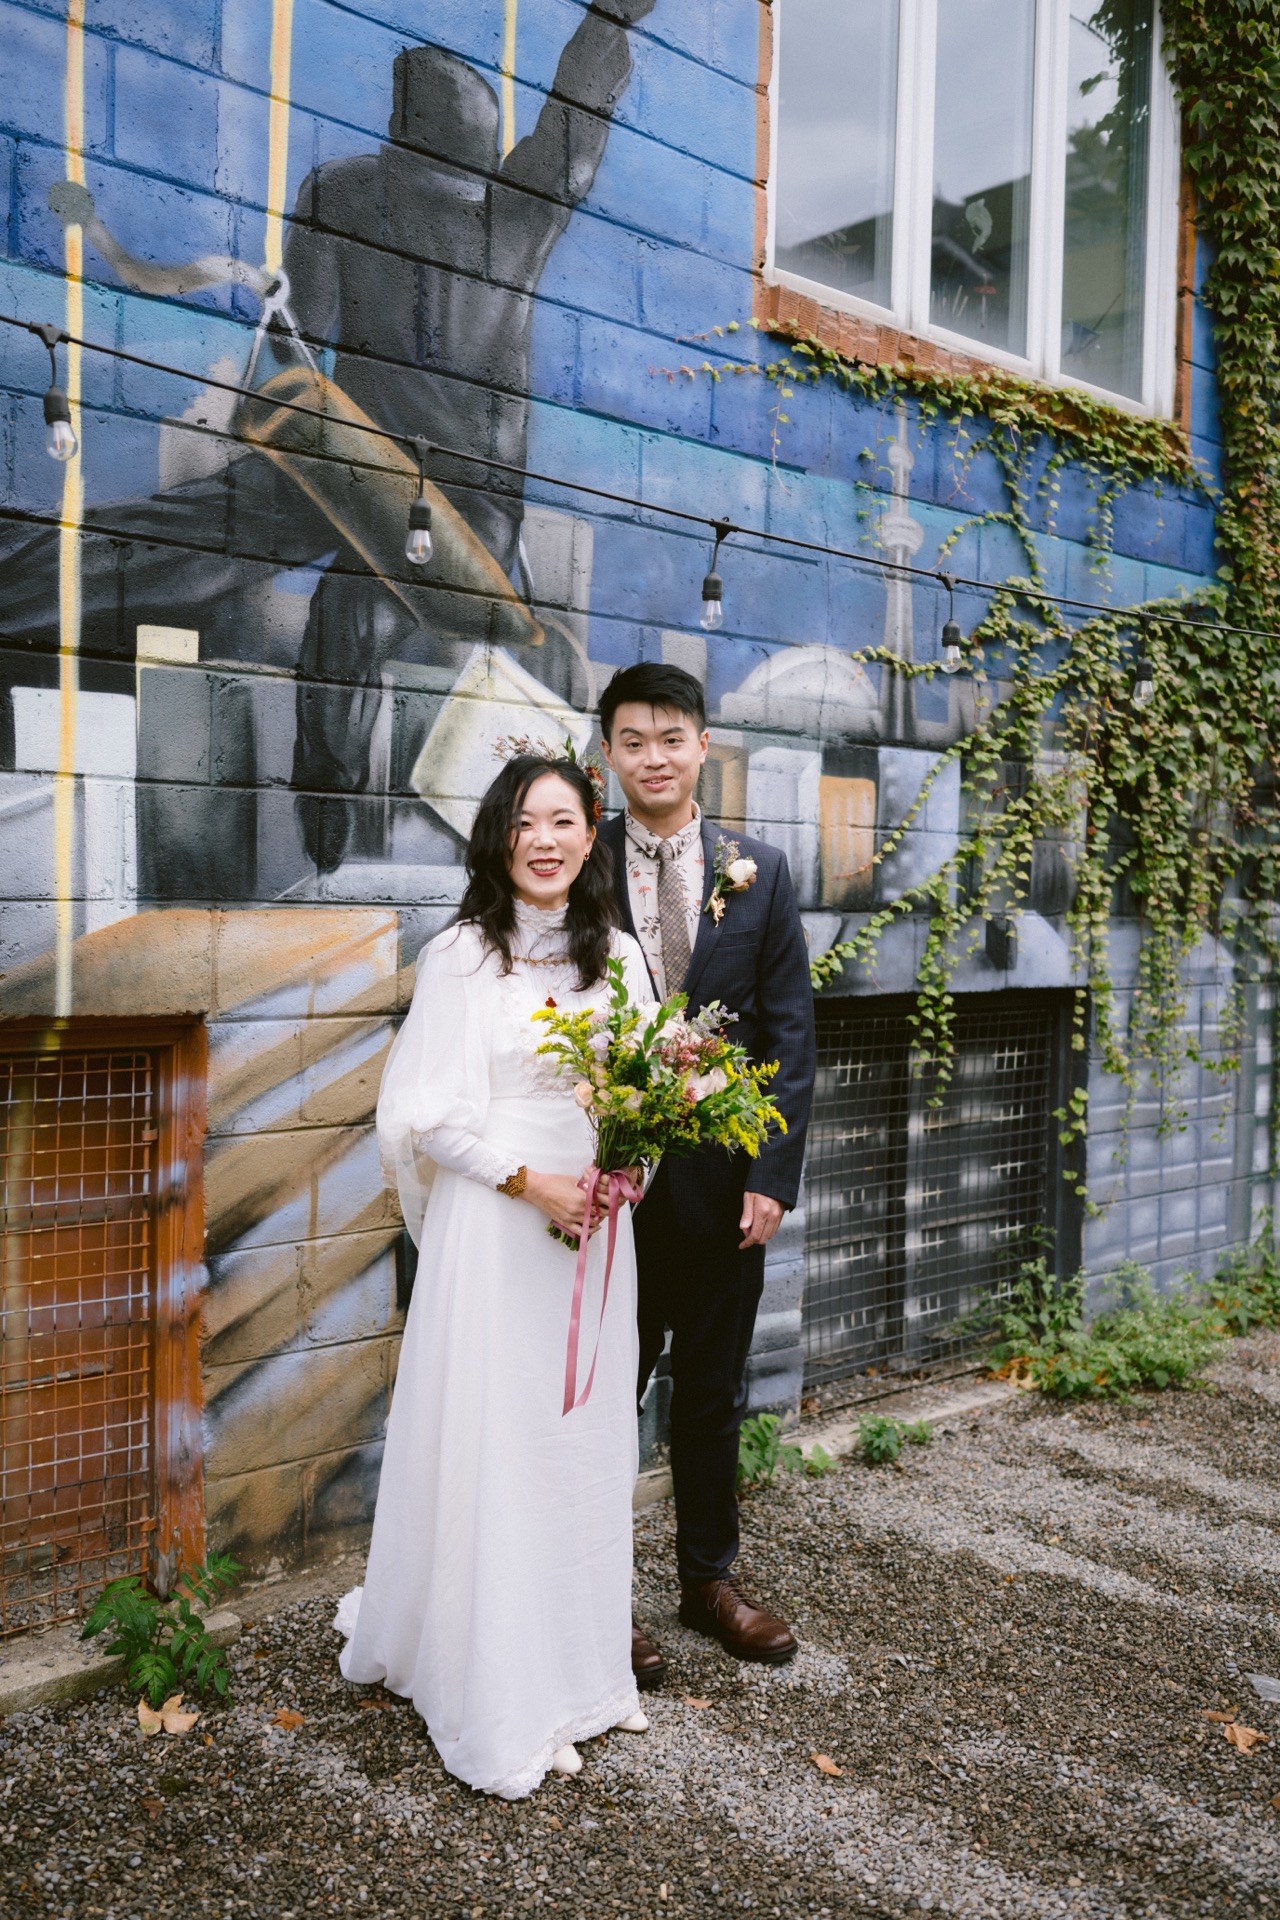 Bride and groom posing in front of a mural for their micro-wedding.